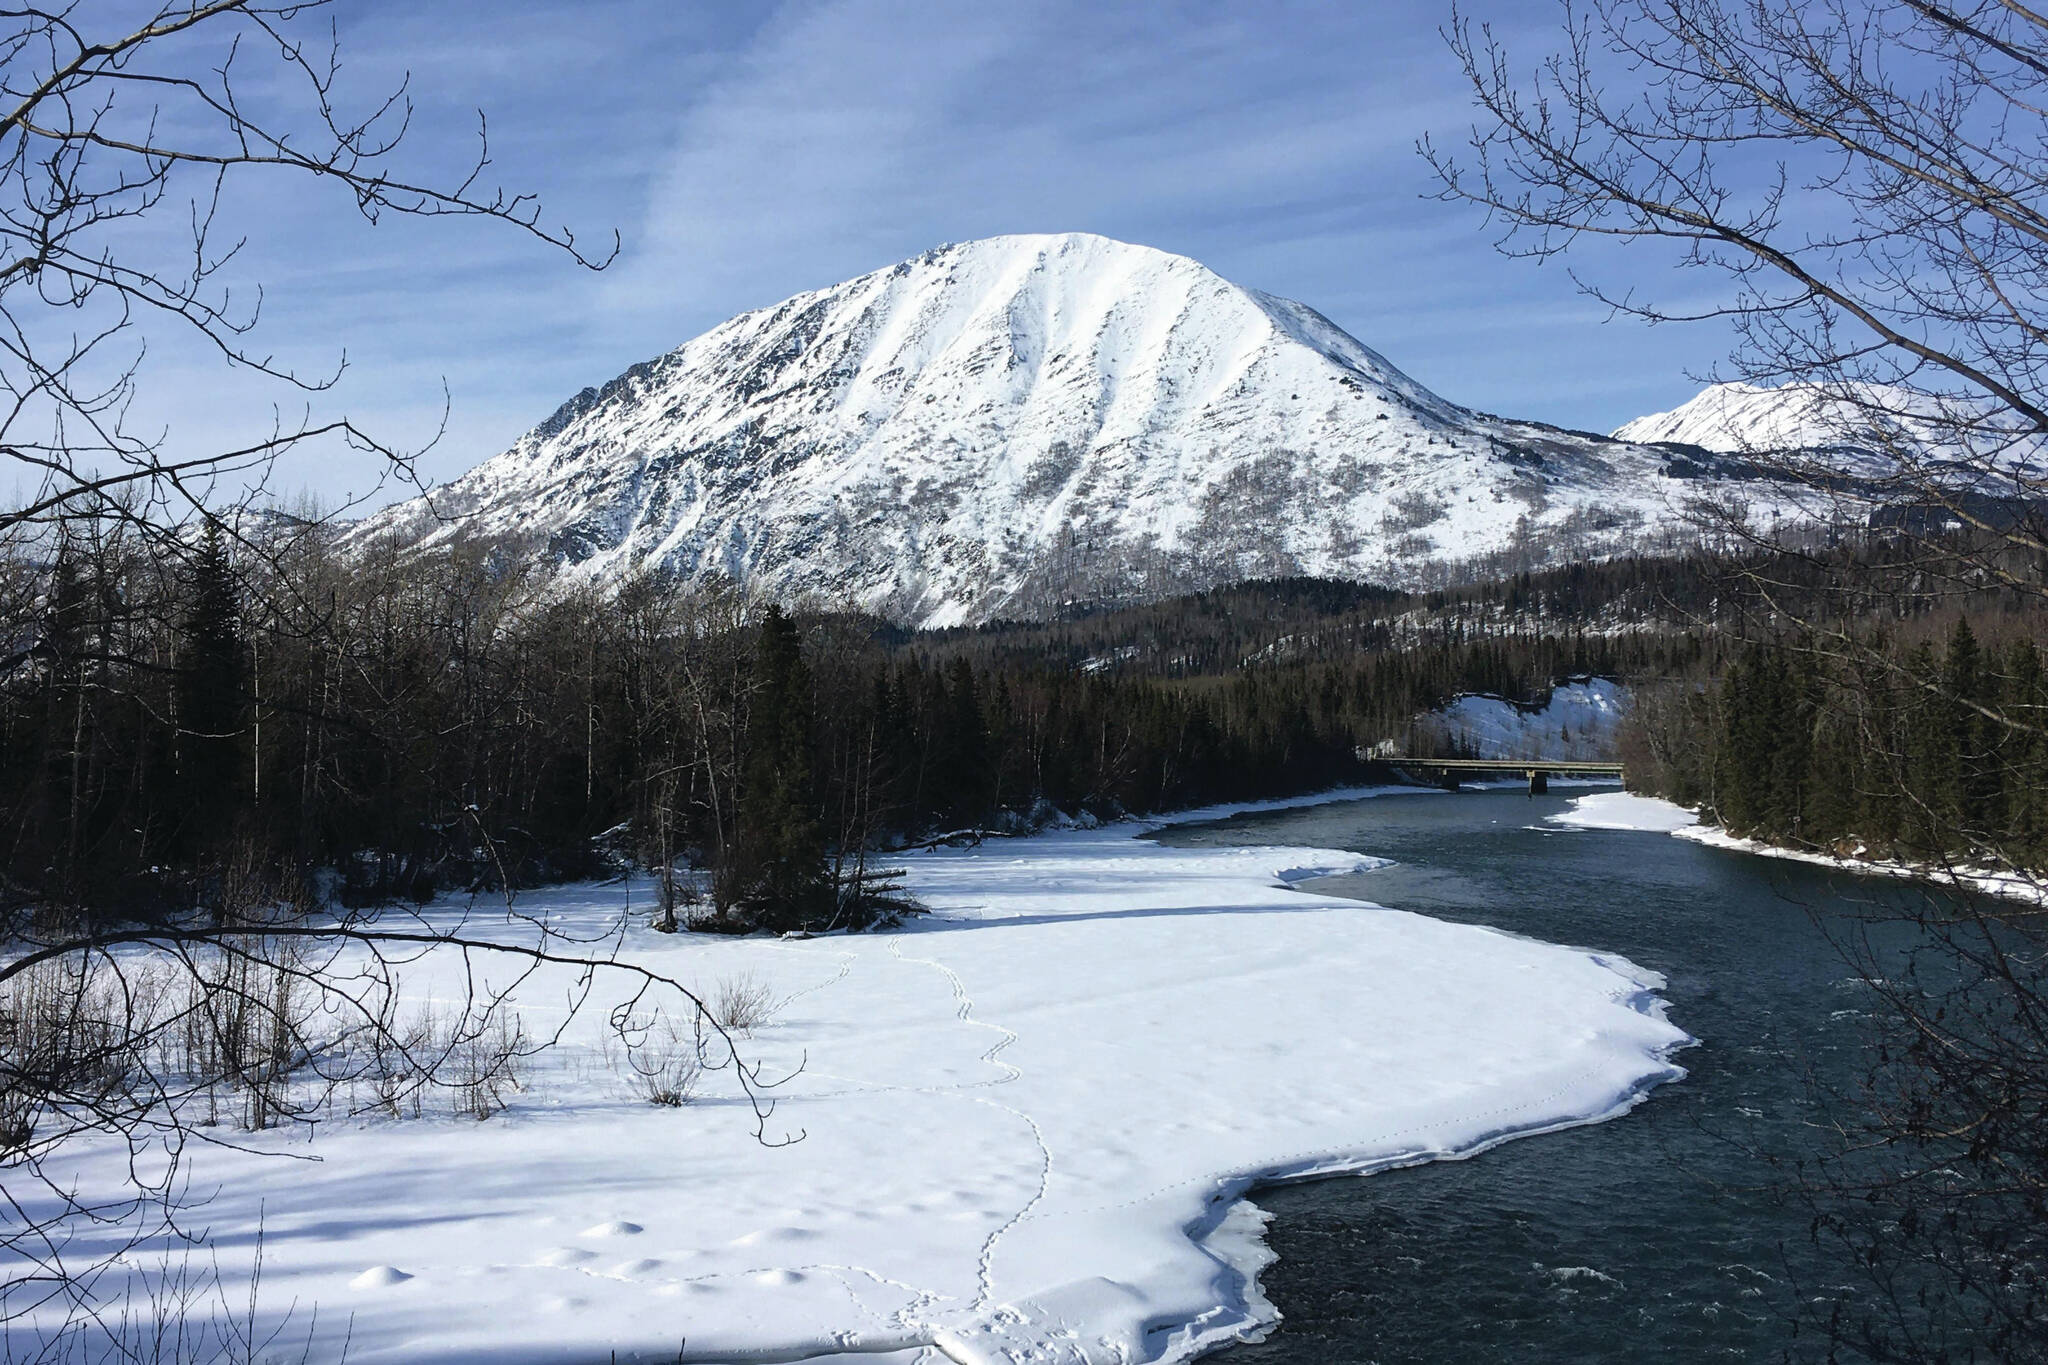 Jeff Helminiak/Peninsula Clarion
The Sterling Highway crosses the Kenai River near the Russian River Campground on March 15, 2020, near Cooper Landing.